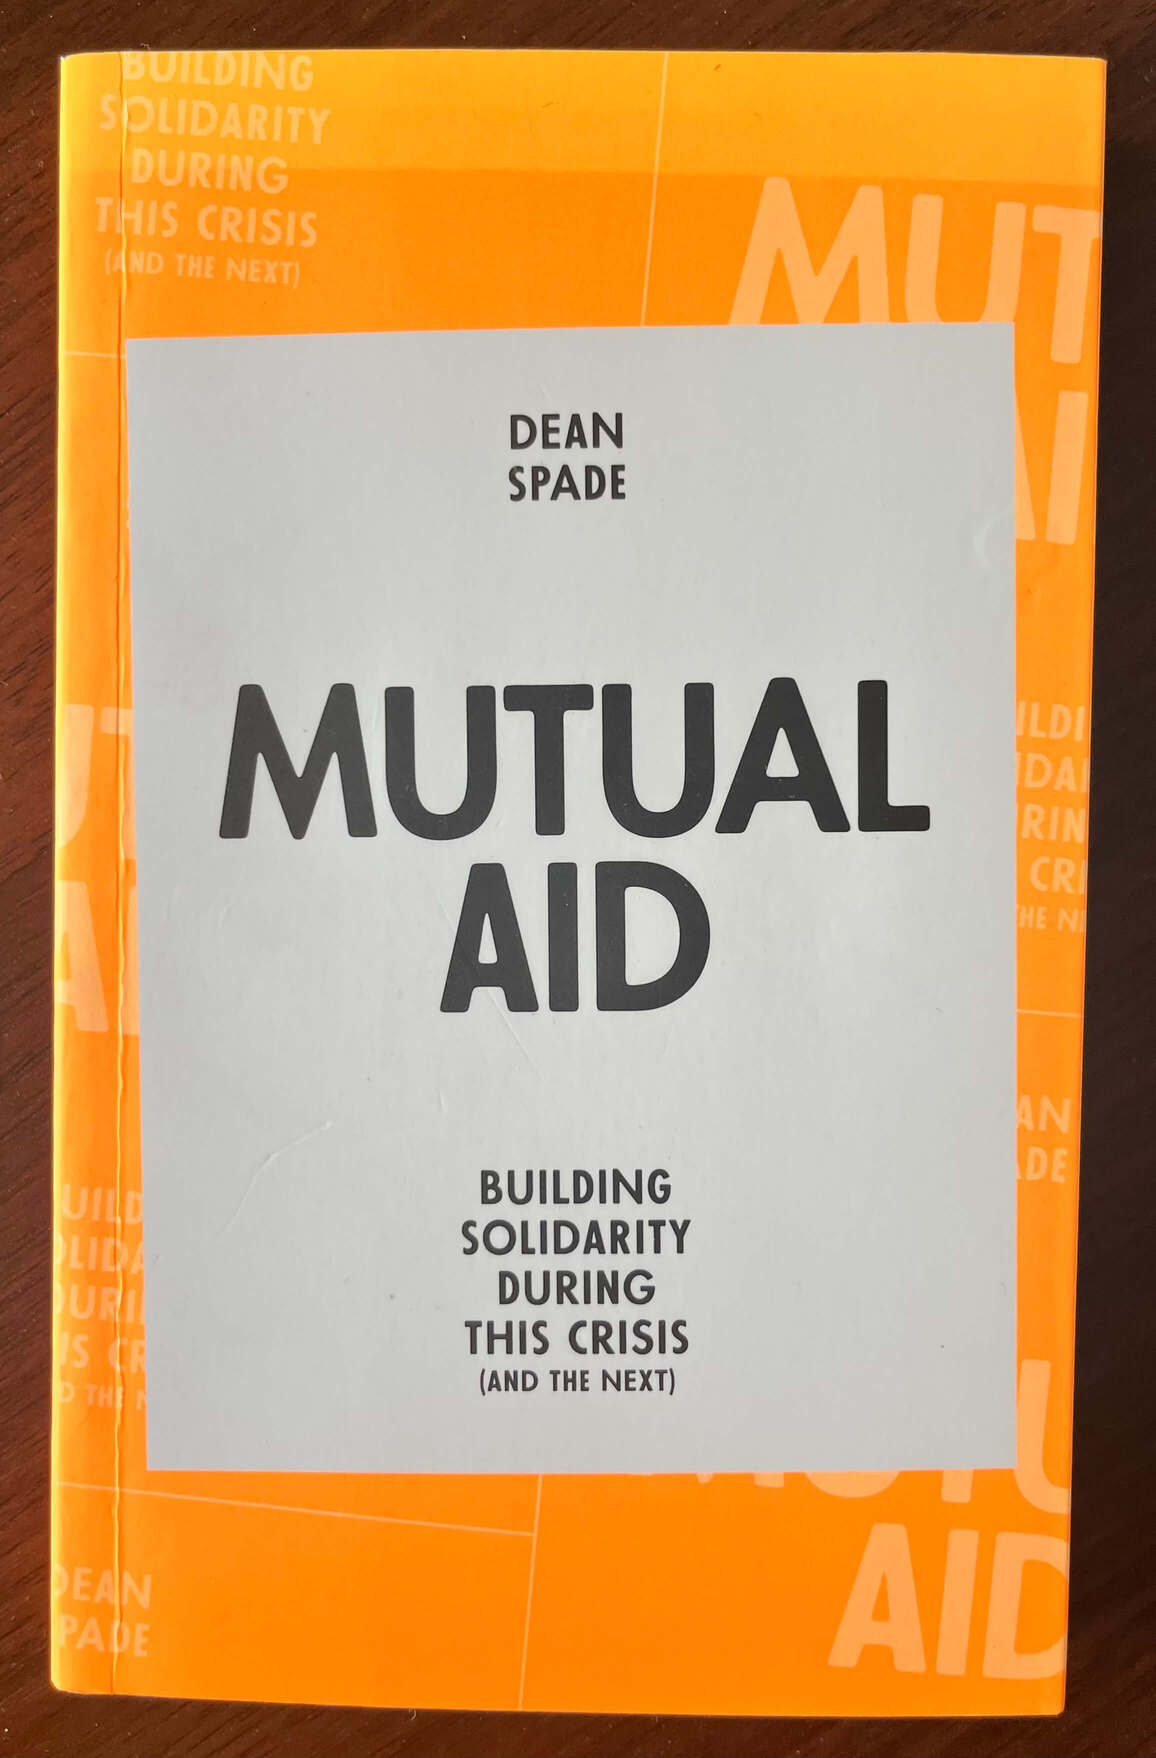 “Mutual Aid: Building Solidarity During this Crisis (and the Next)” by Dean Spade.